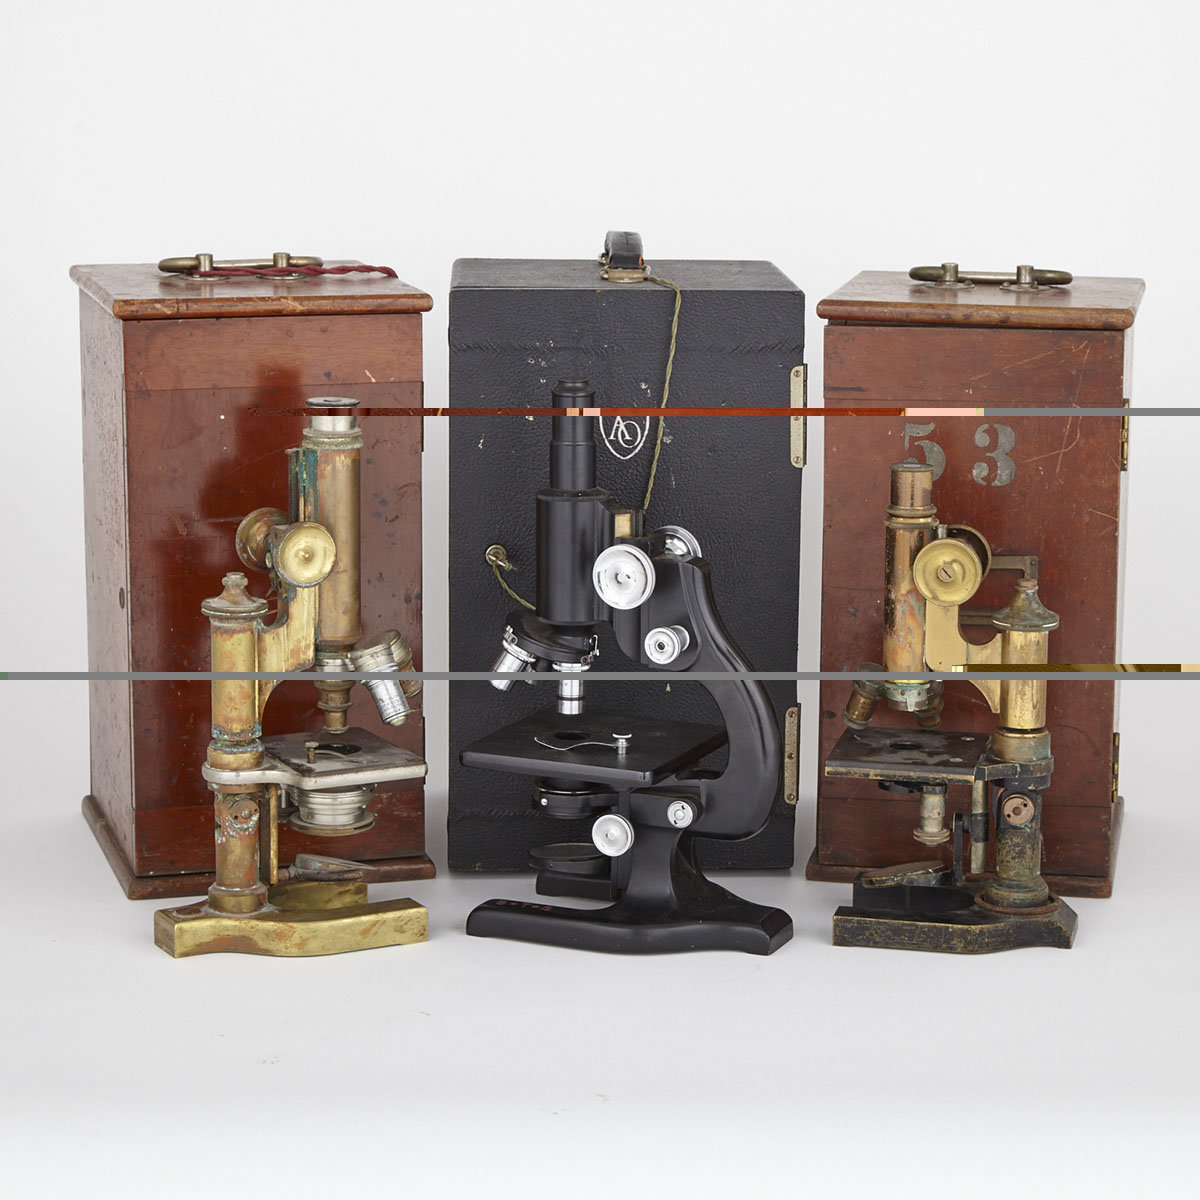 Group of Three Compound Microscopes, Ernst Leitz and Bausch and Lomb, and American Optical Company (Spencer), early 20th century